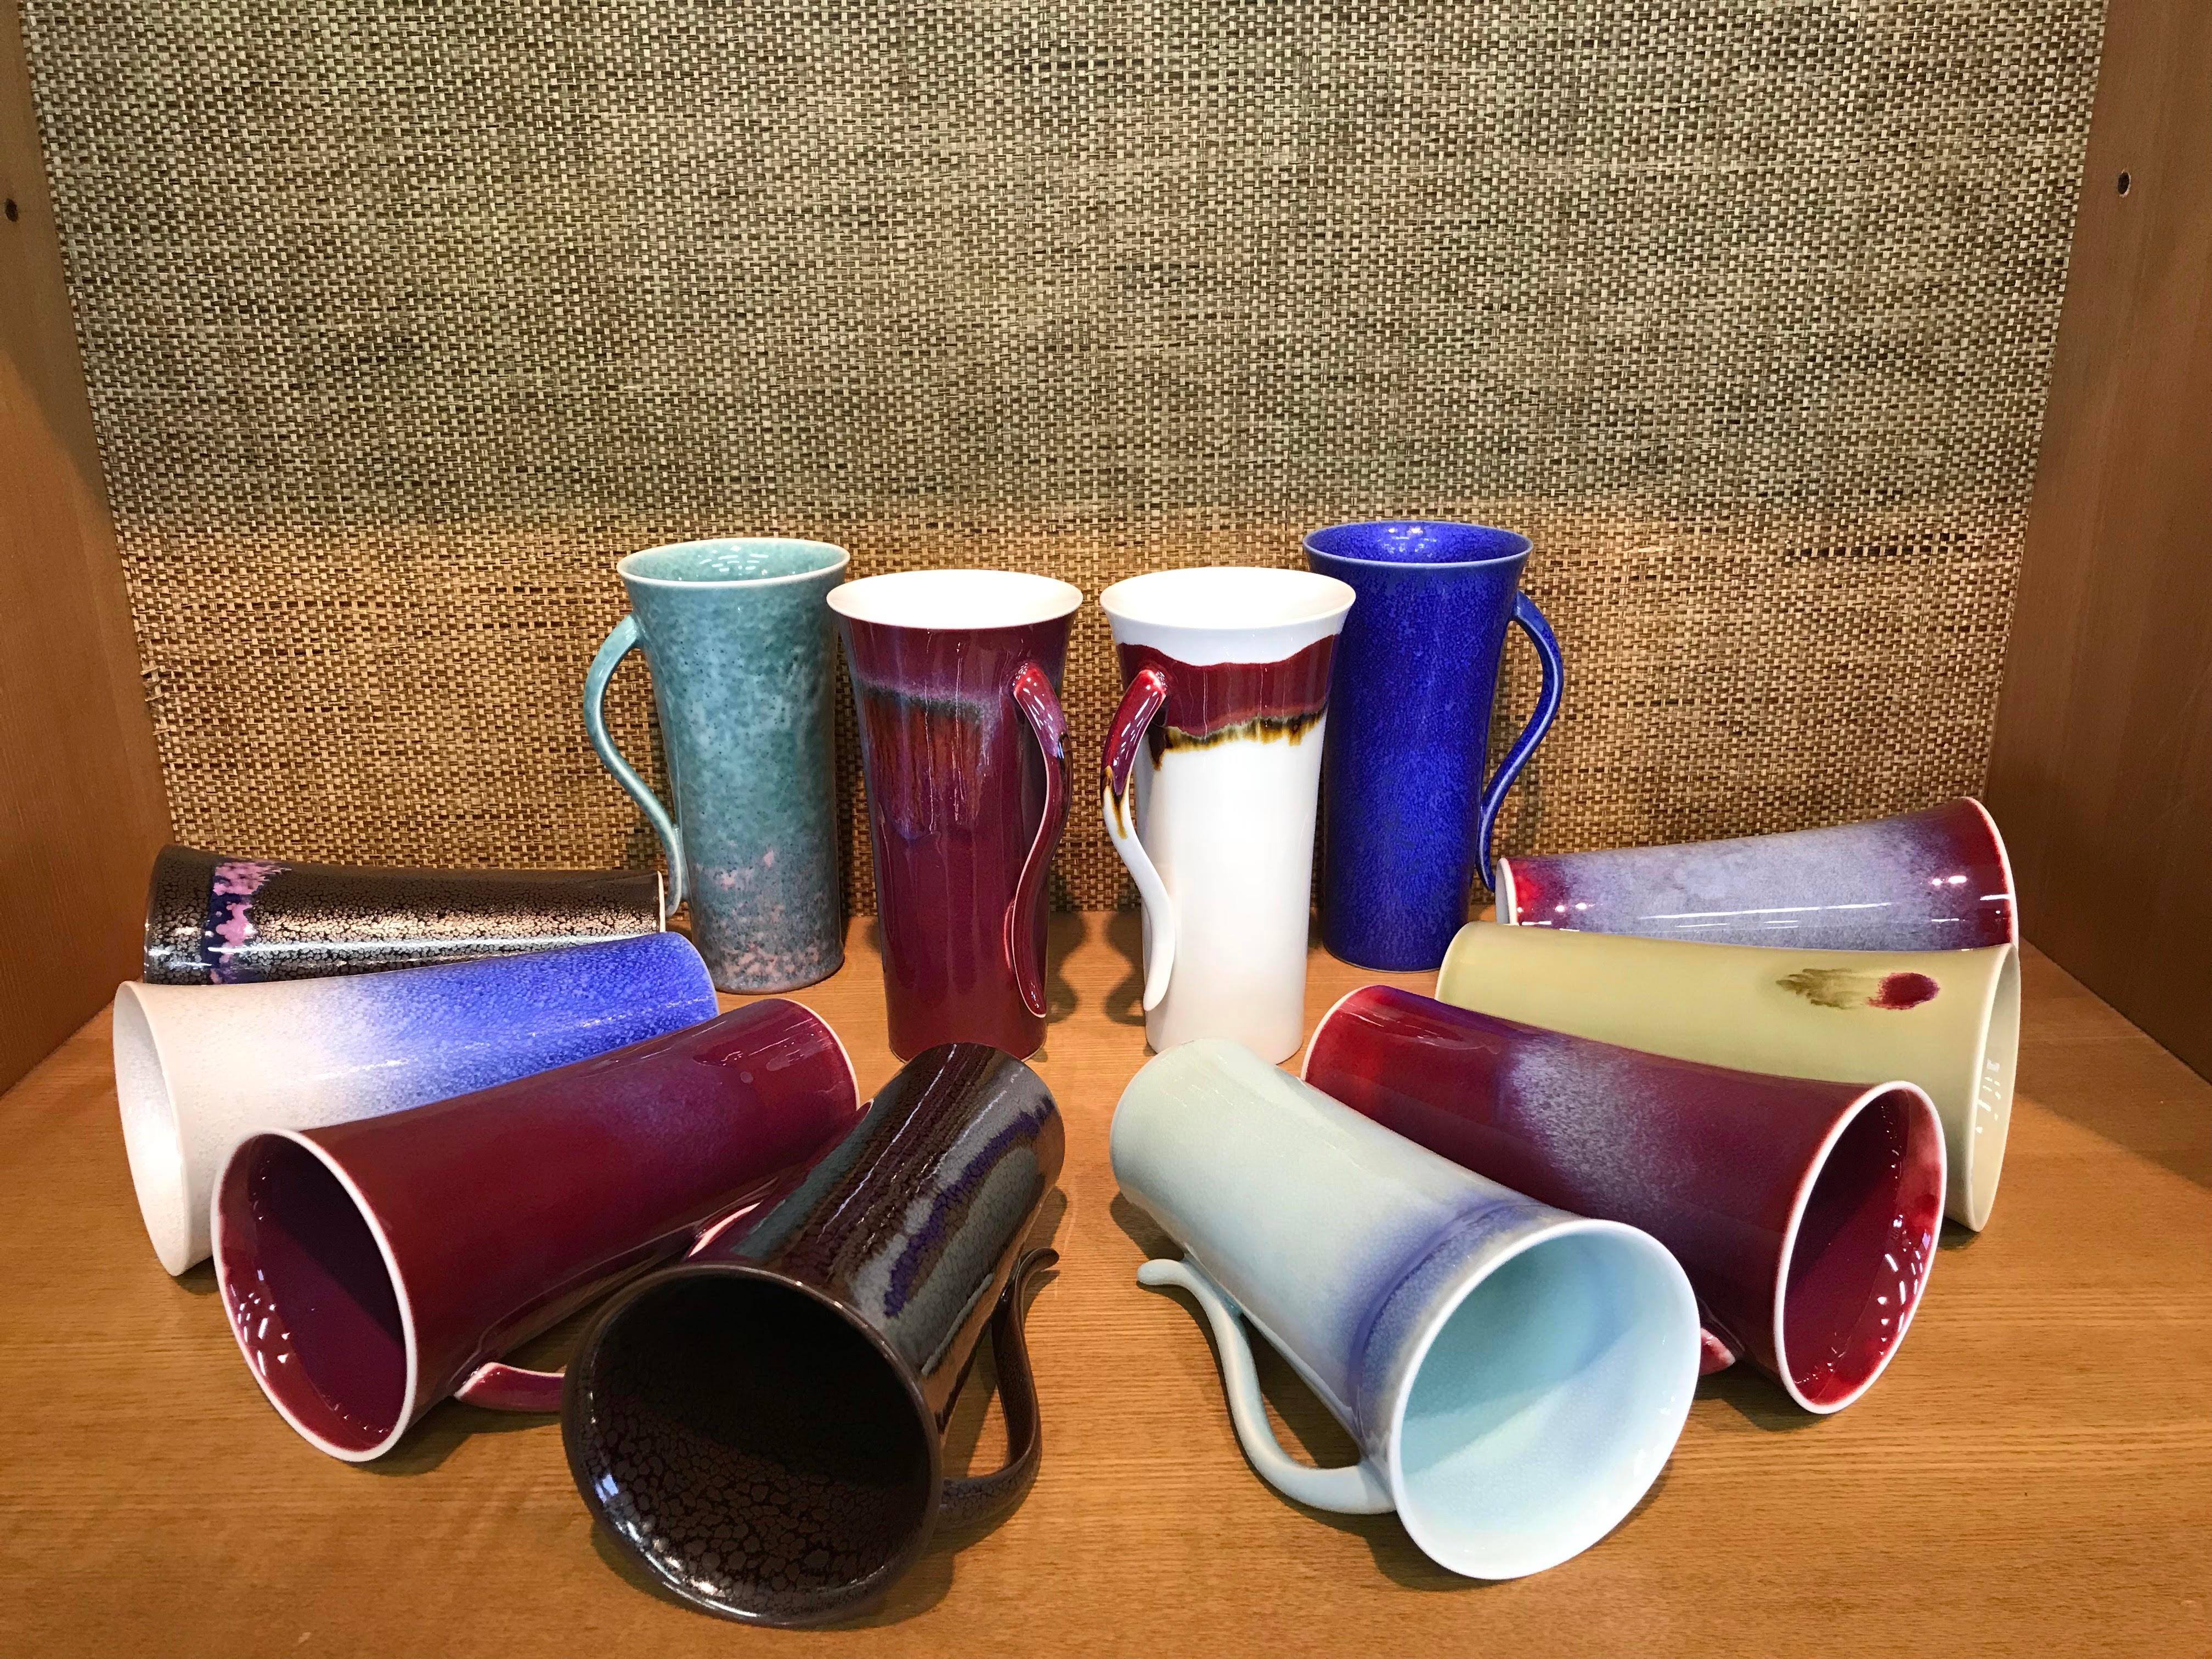 Unique extraordinary set of 12 Japanese contemporary tall hand-glazed porcelain mugs/cups in a beautiful shape masterfully glazed in the artist's breathtaking signature colors like wine-red, green and white, signed pieces by widely respected